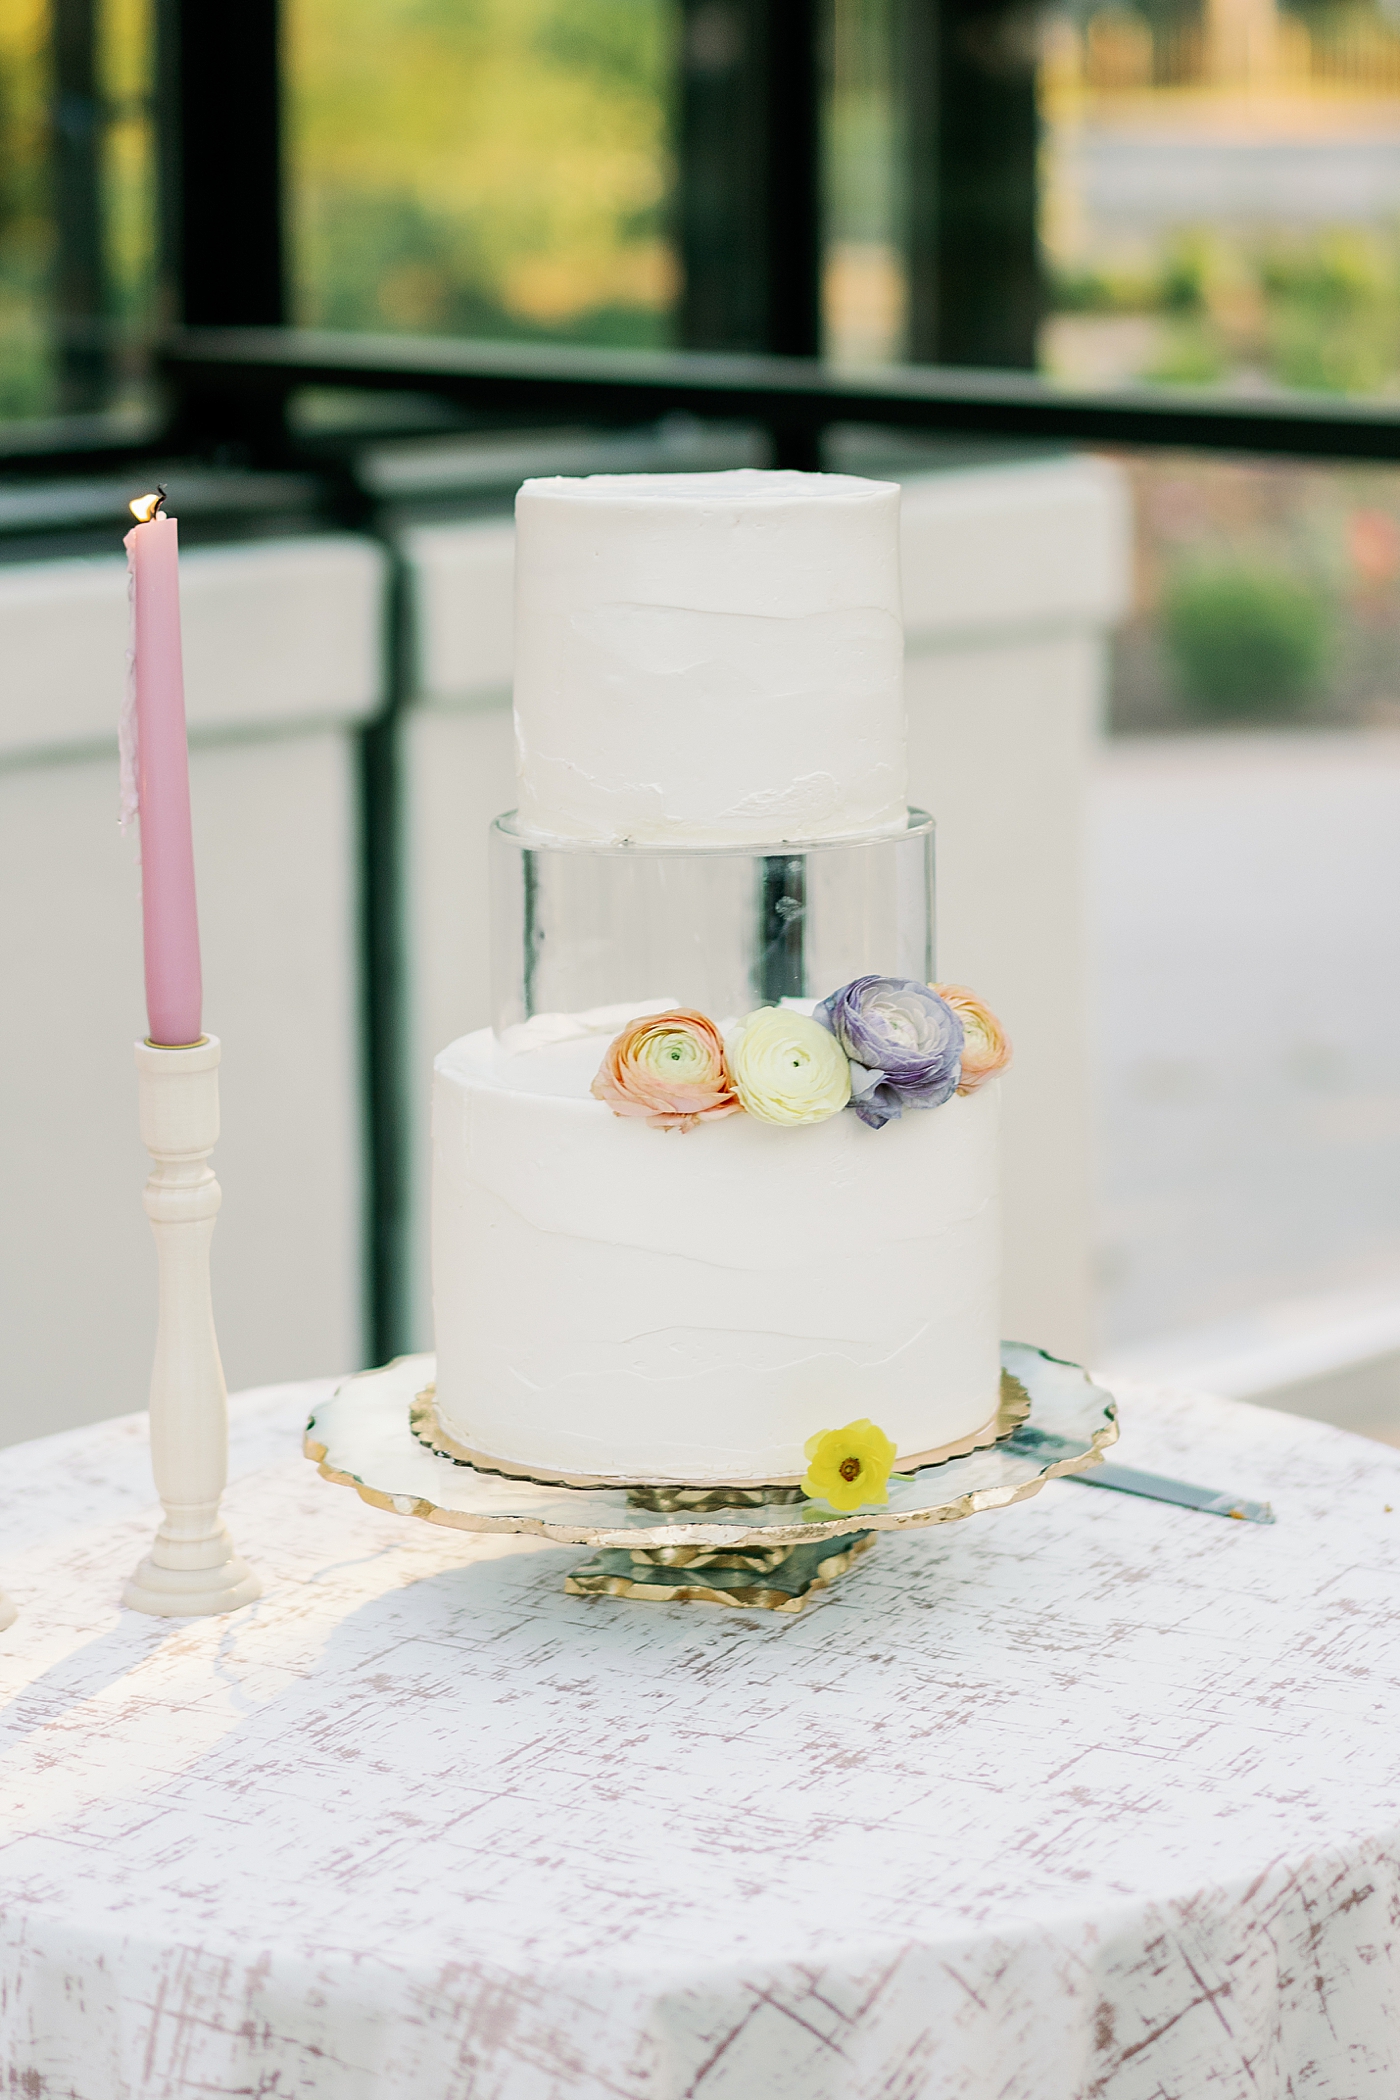 Cake with pink pillar candles during summer inspired garden wedding | Photo by Annie Laura Photo